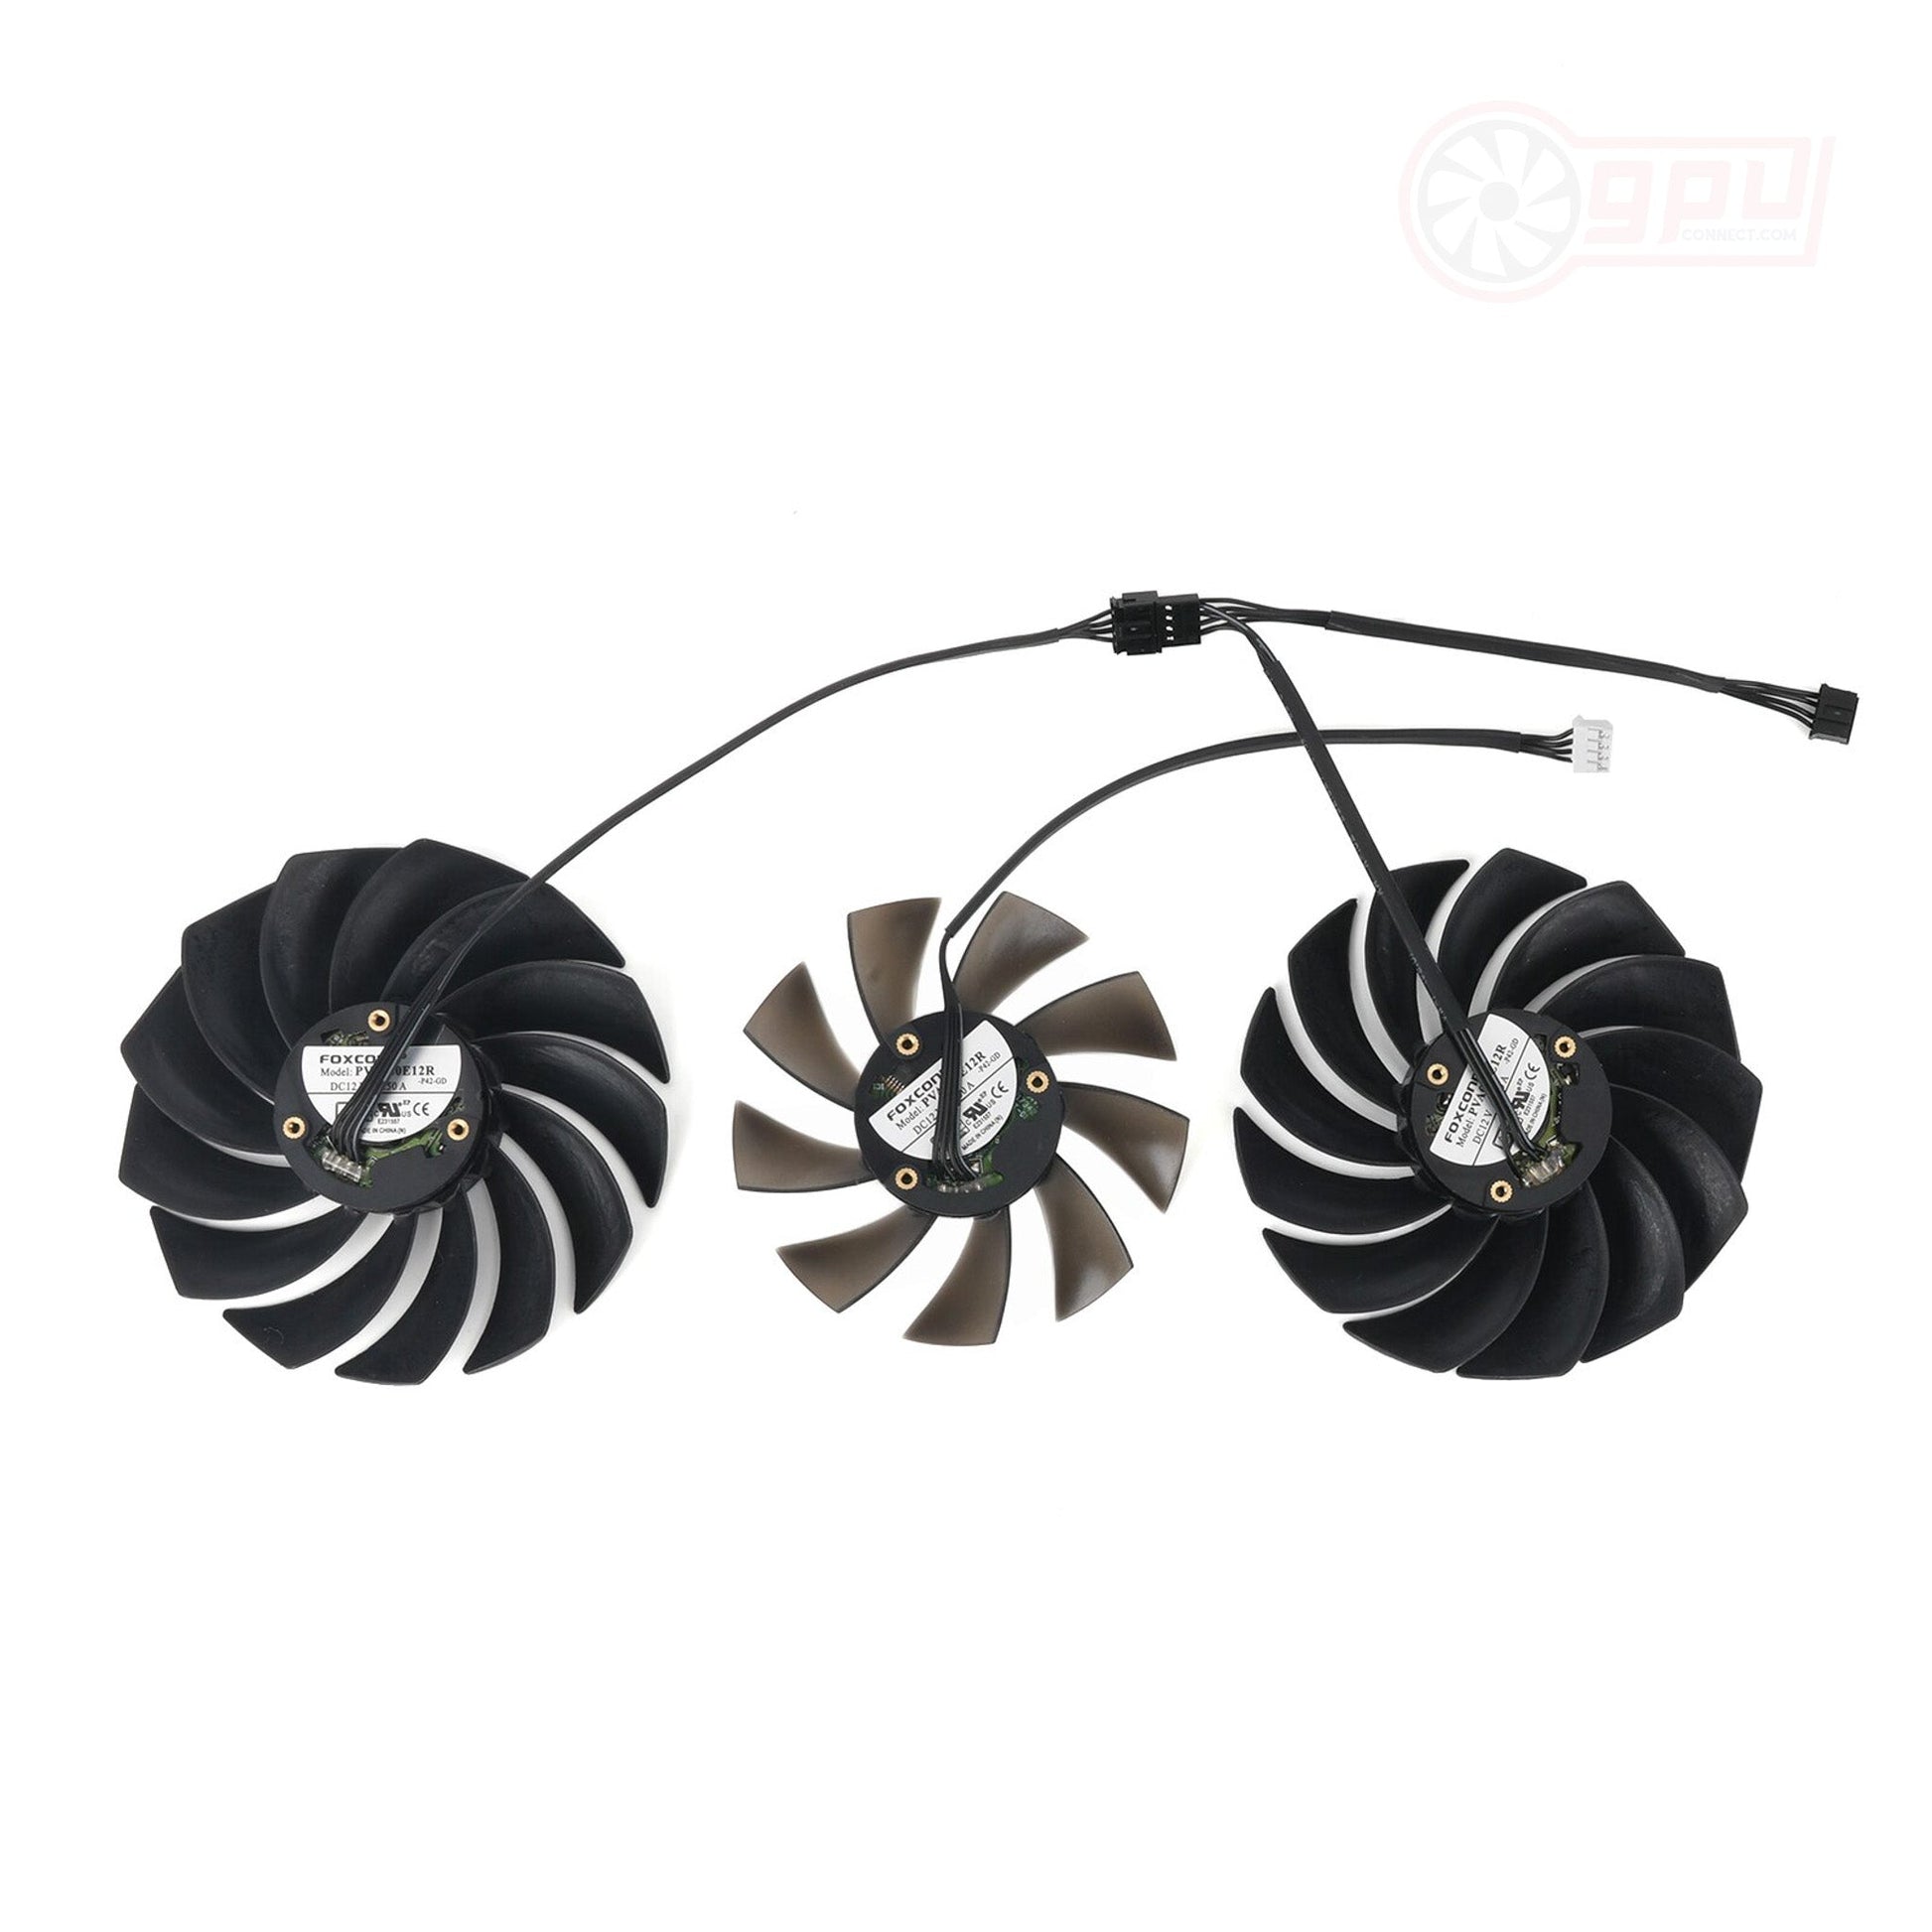 COLORFUL iGame RTX 3060 3070 3080 Ti 3090 Advanced Replacement Fan Set - GPUCONNECT.COM